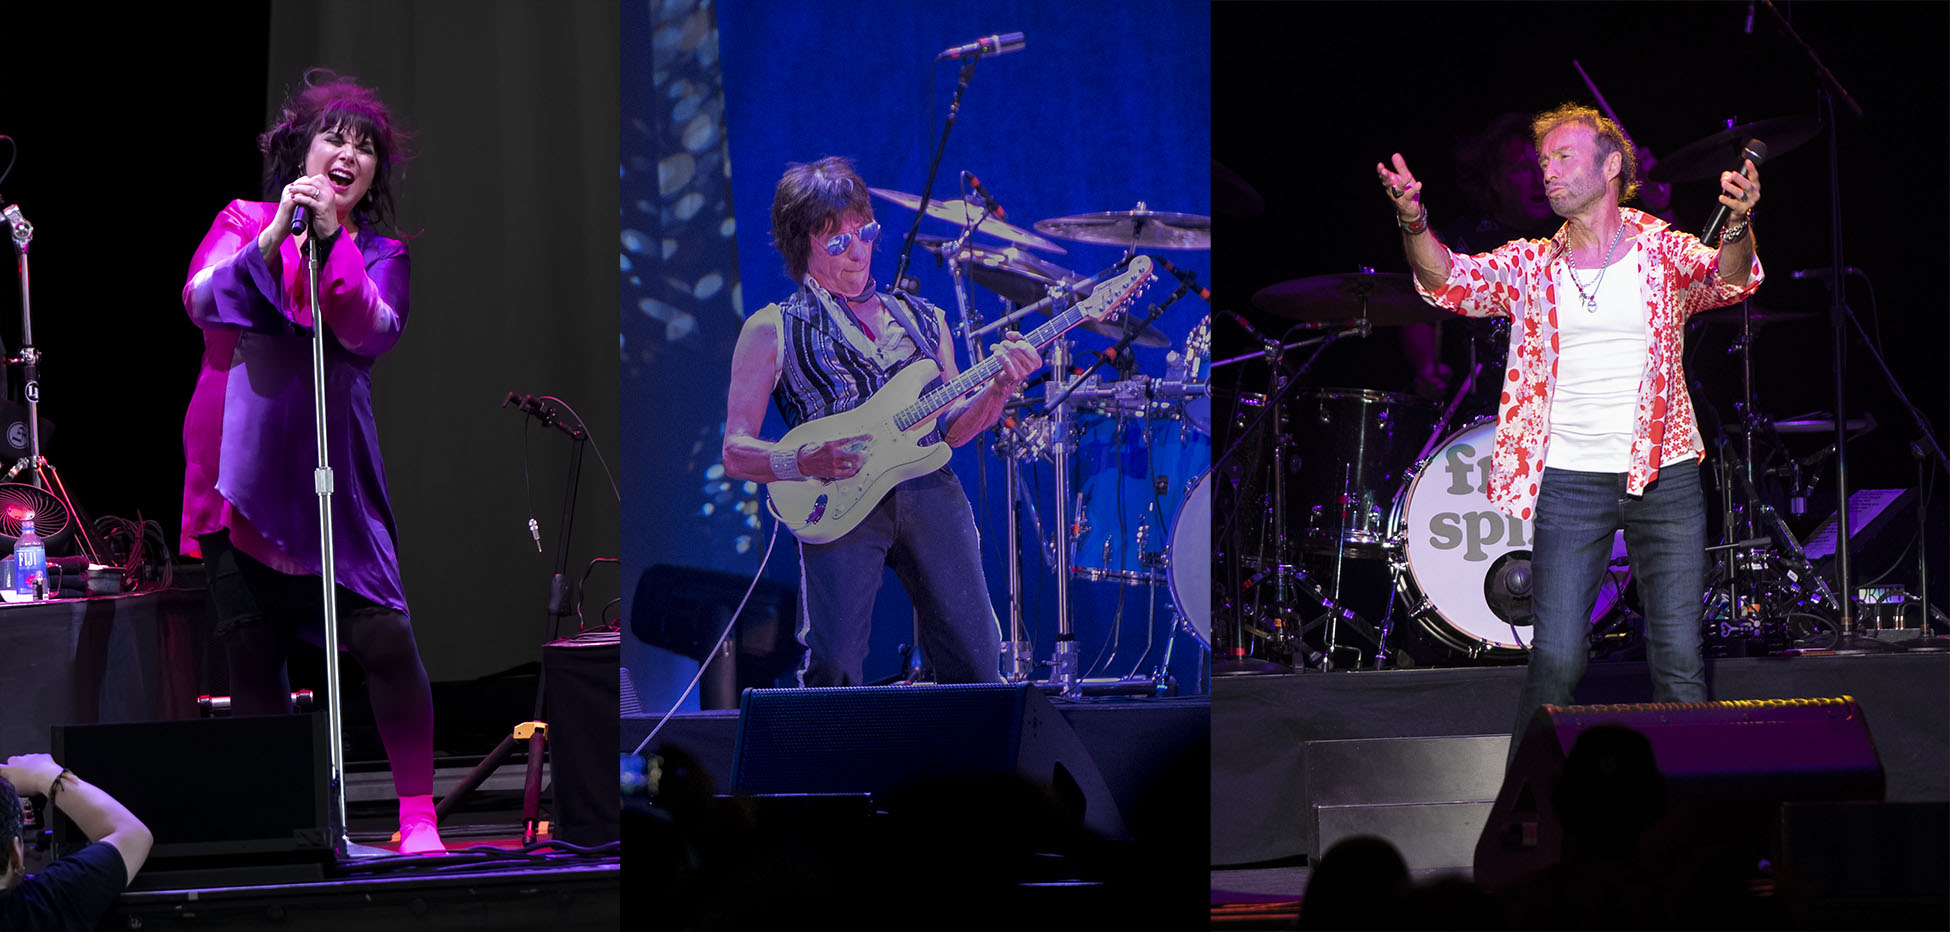 Ann Wilson, Jeff Beck and Paul Rodgers at the Blue Hills Bank Pavillion, Boston, MA August 3, 2018